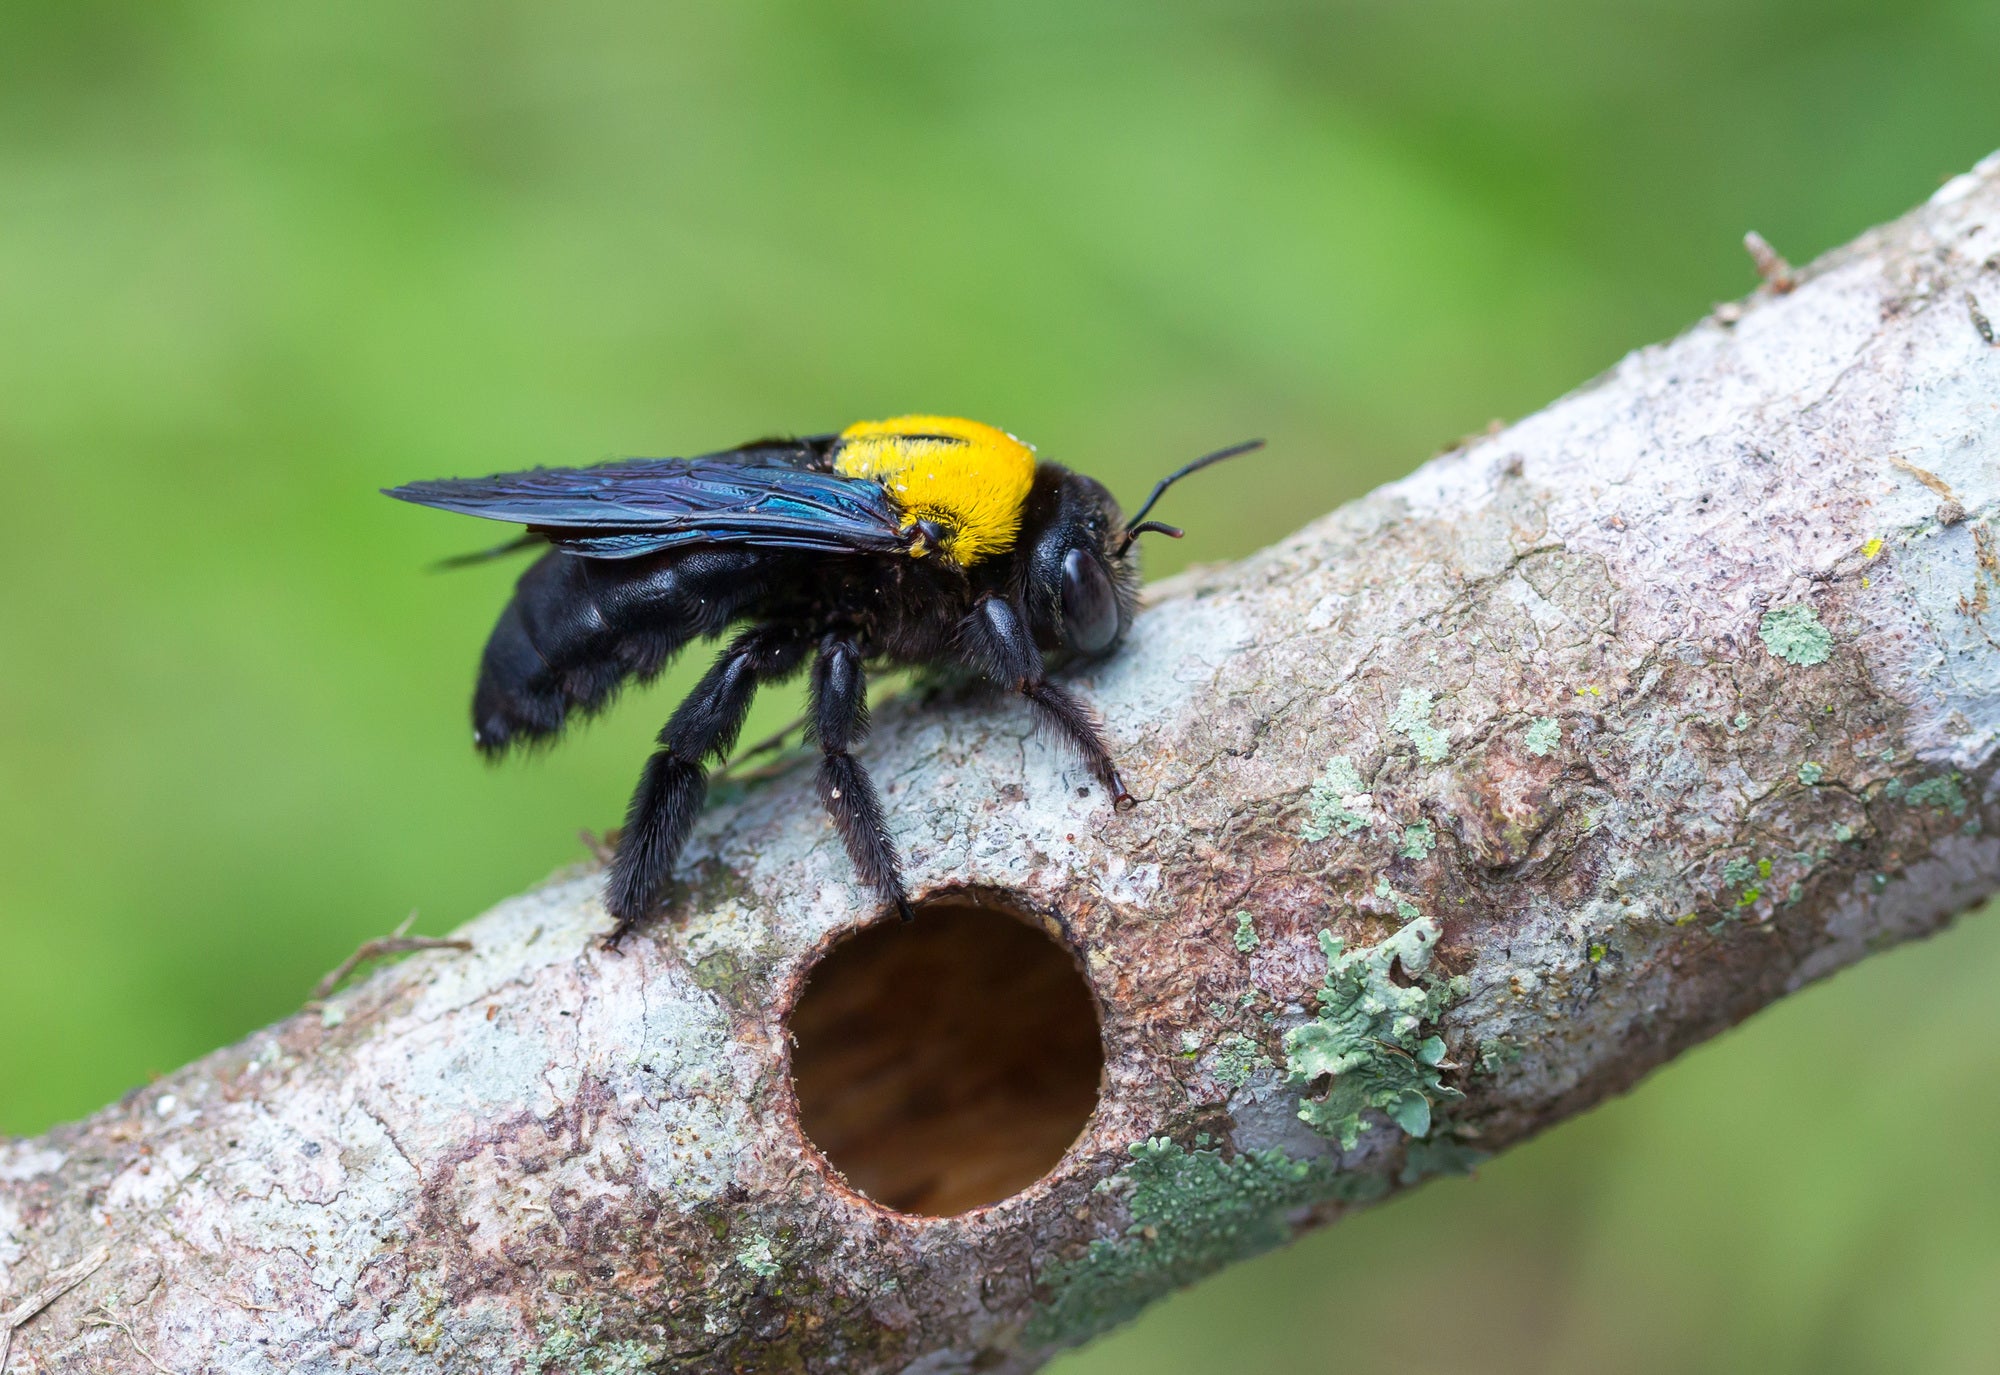 Load video: How do carpenter bee traps work?